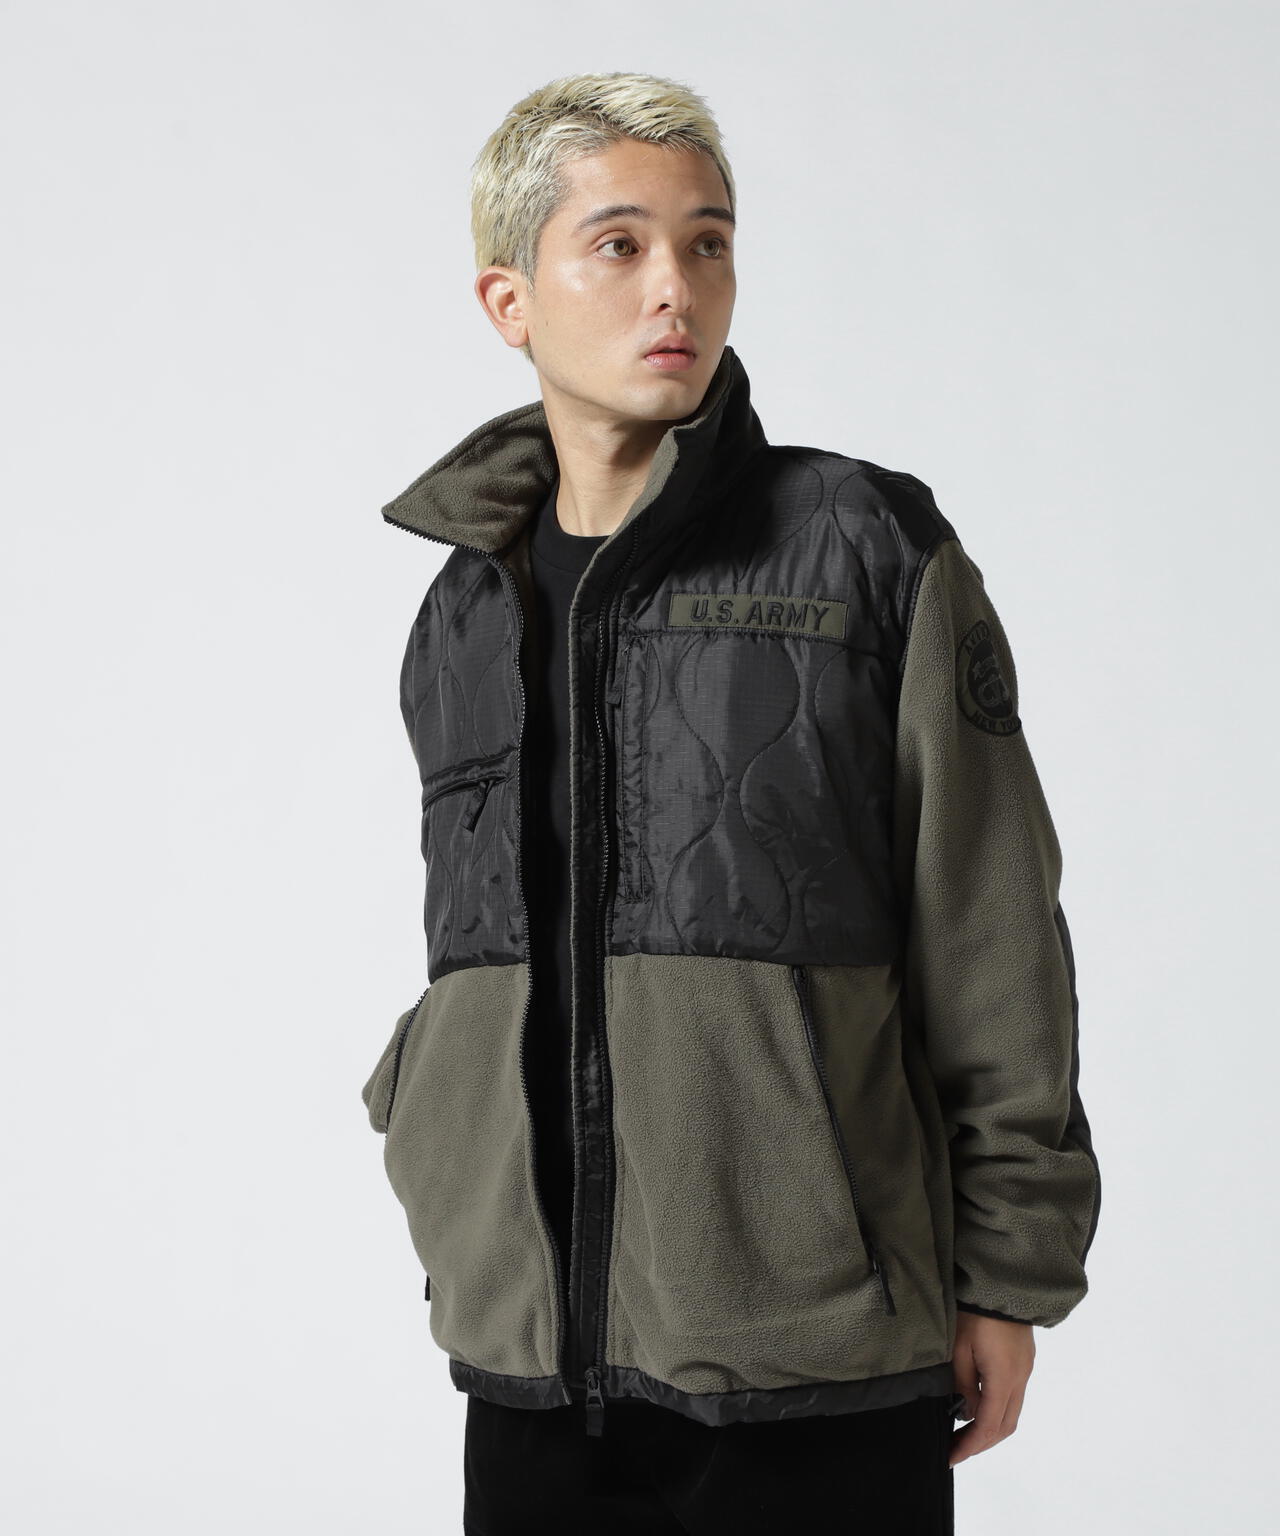 Mercer Mettle MM7200 Jacket with Custom Embroidery